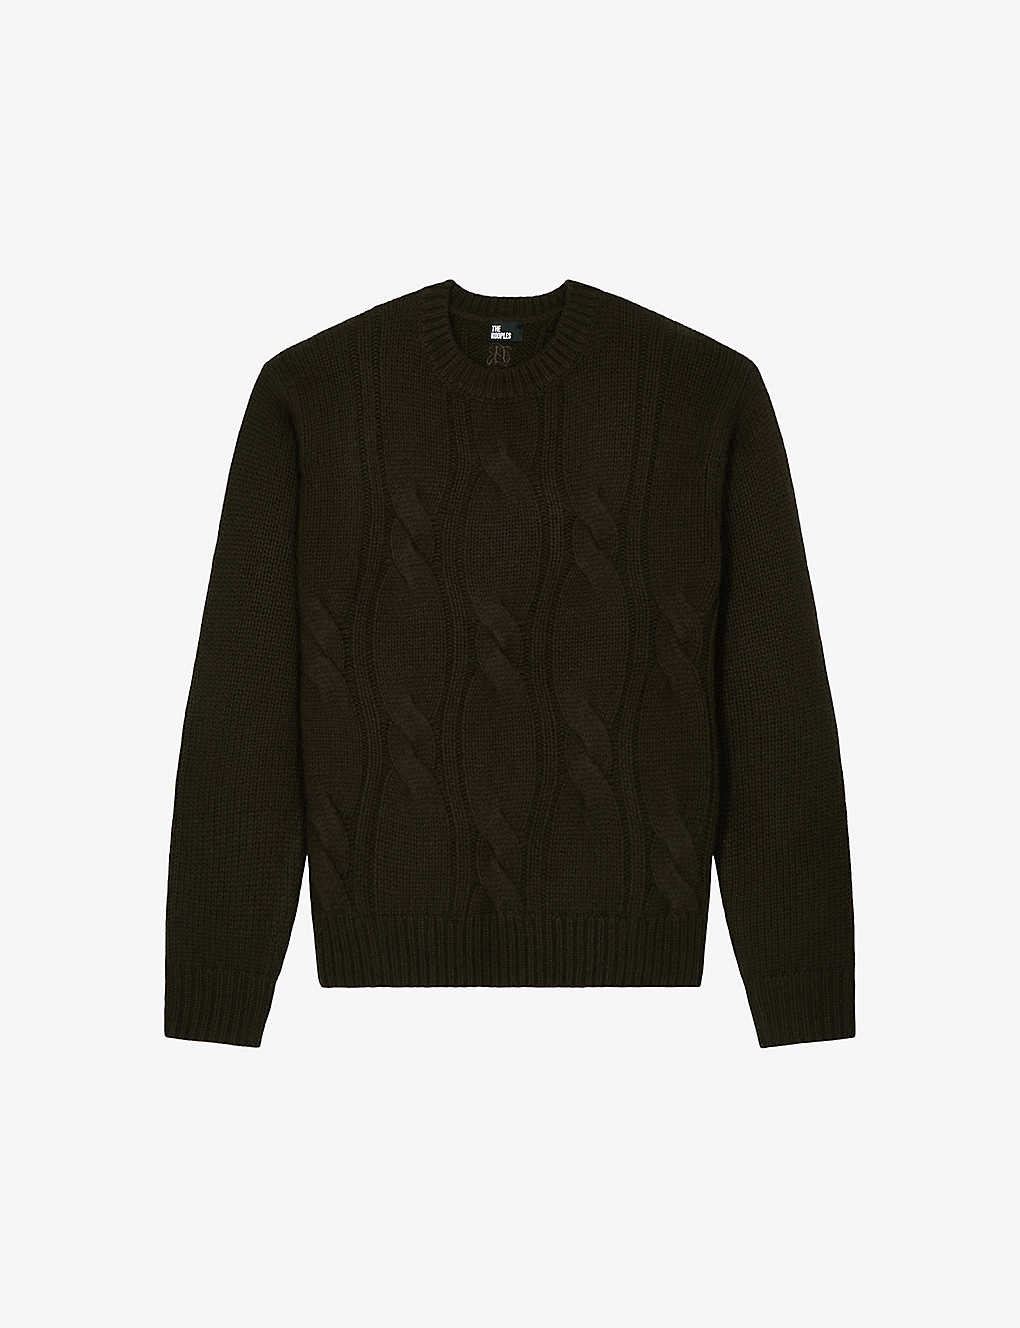 The Kooples Mens Dark Green Cable-knit Wool And Cashmere Jumper